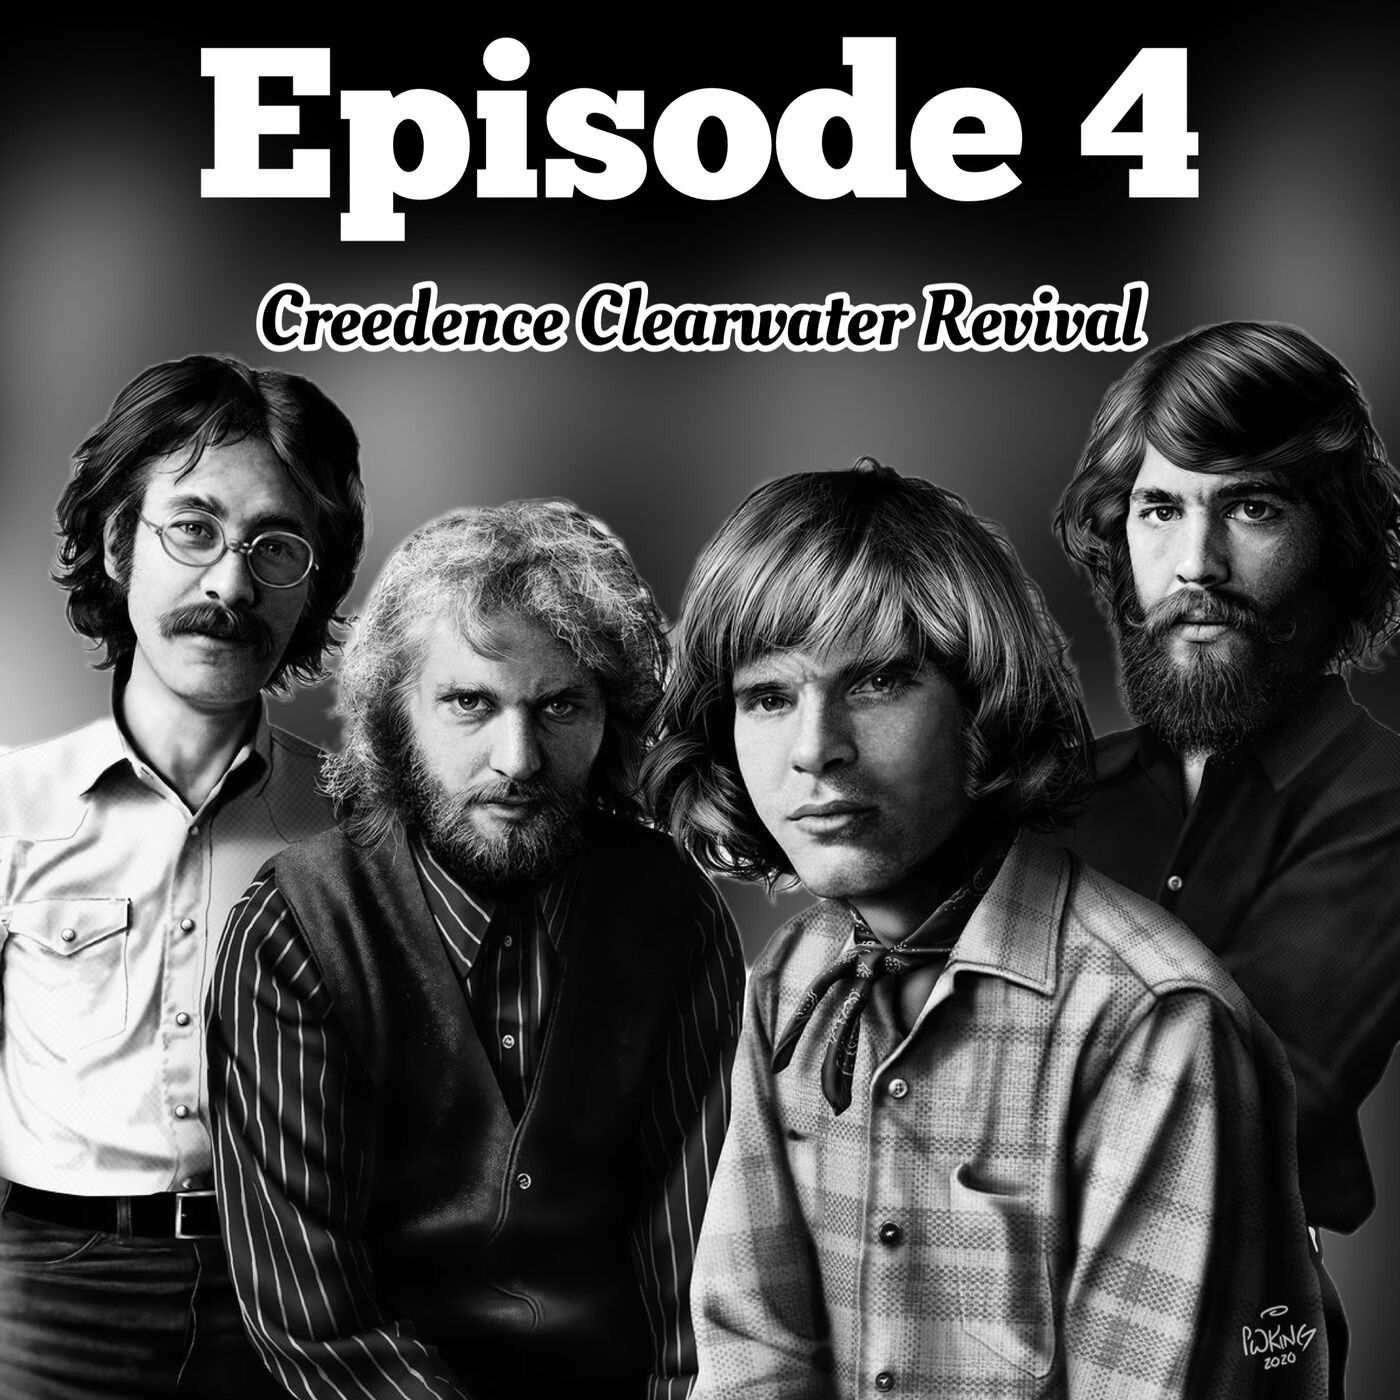 4. Creedence Clearwater Revival